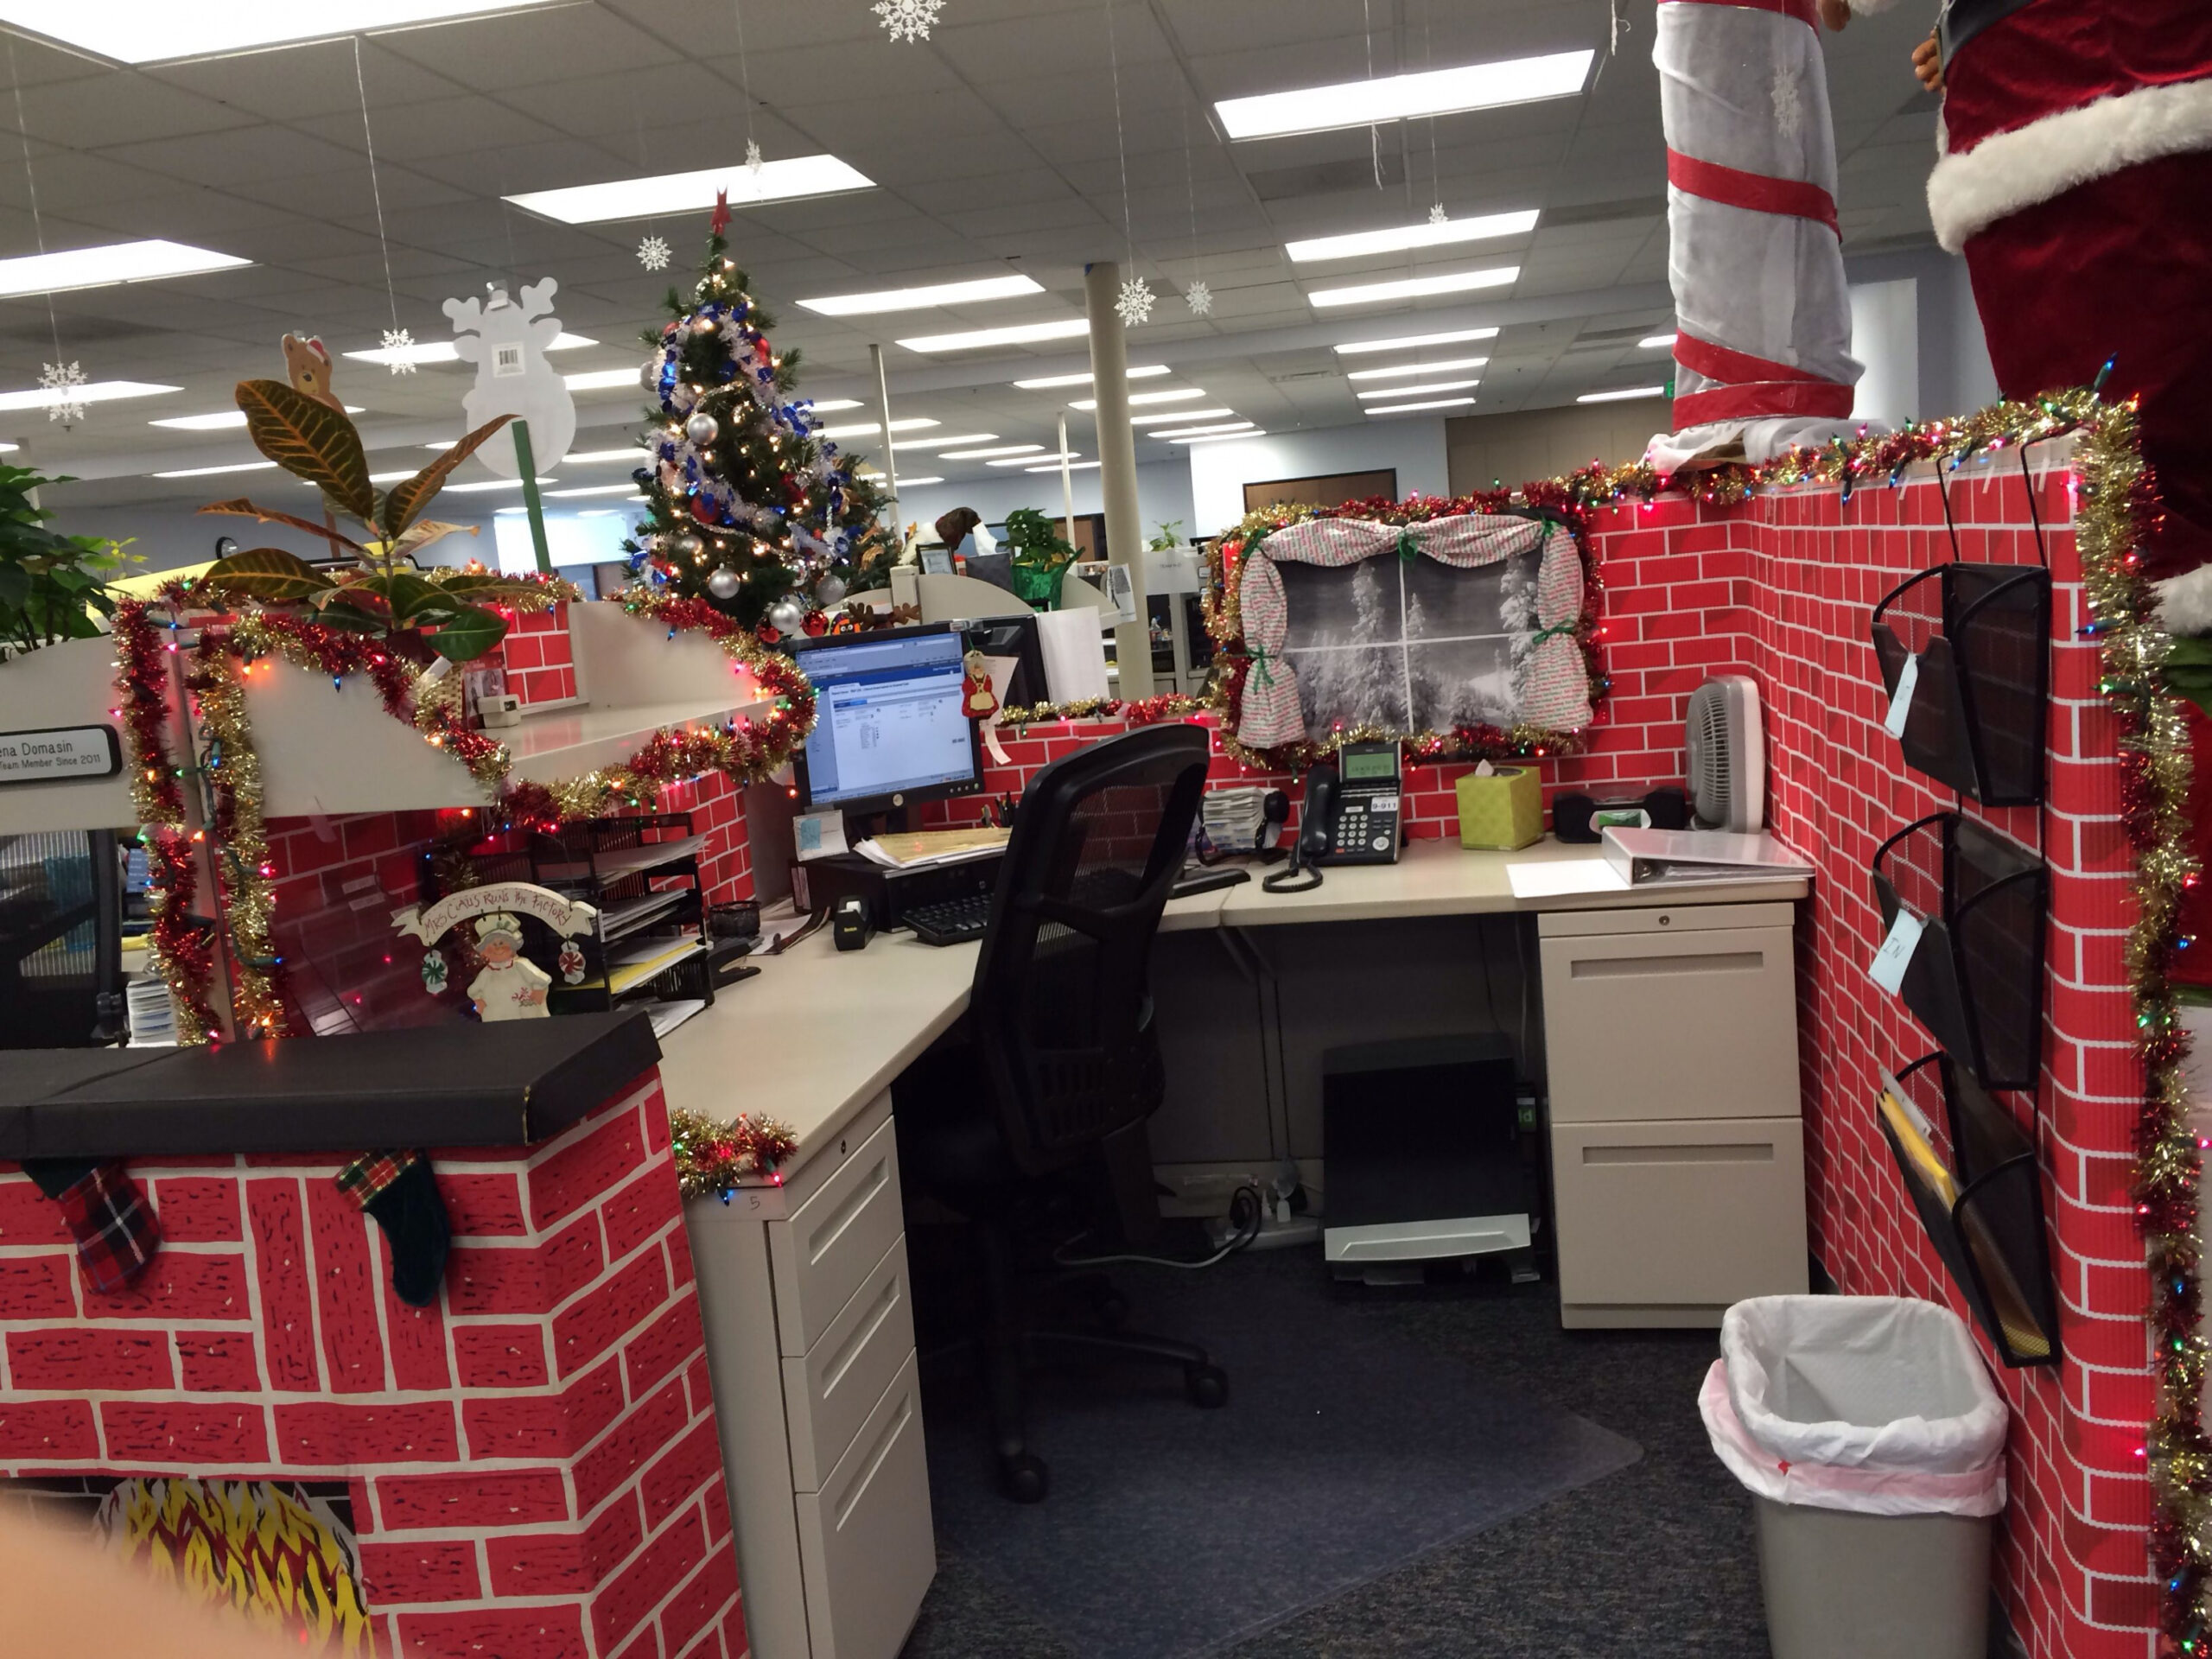 Work Christmas Decorations #work #christmas #cubicle #decorations